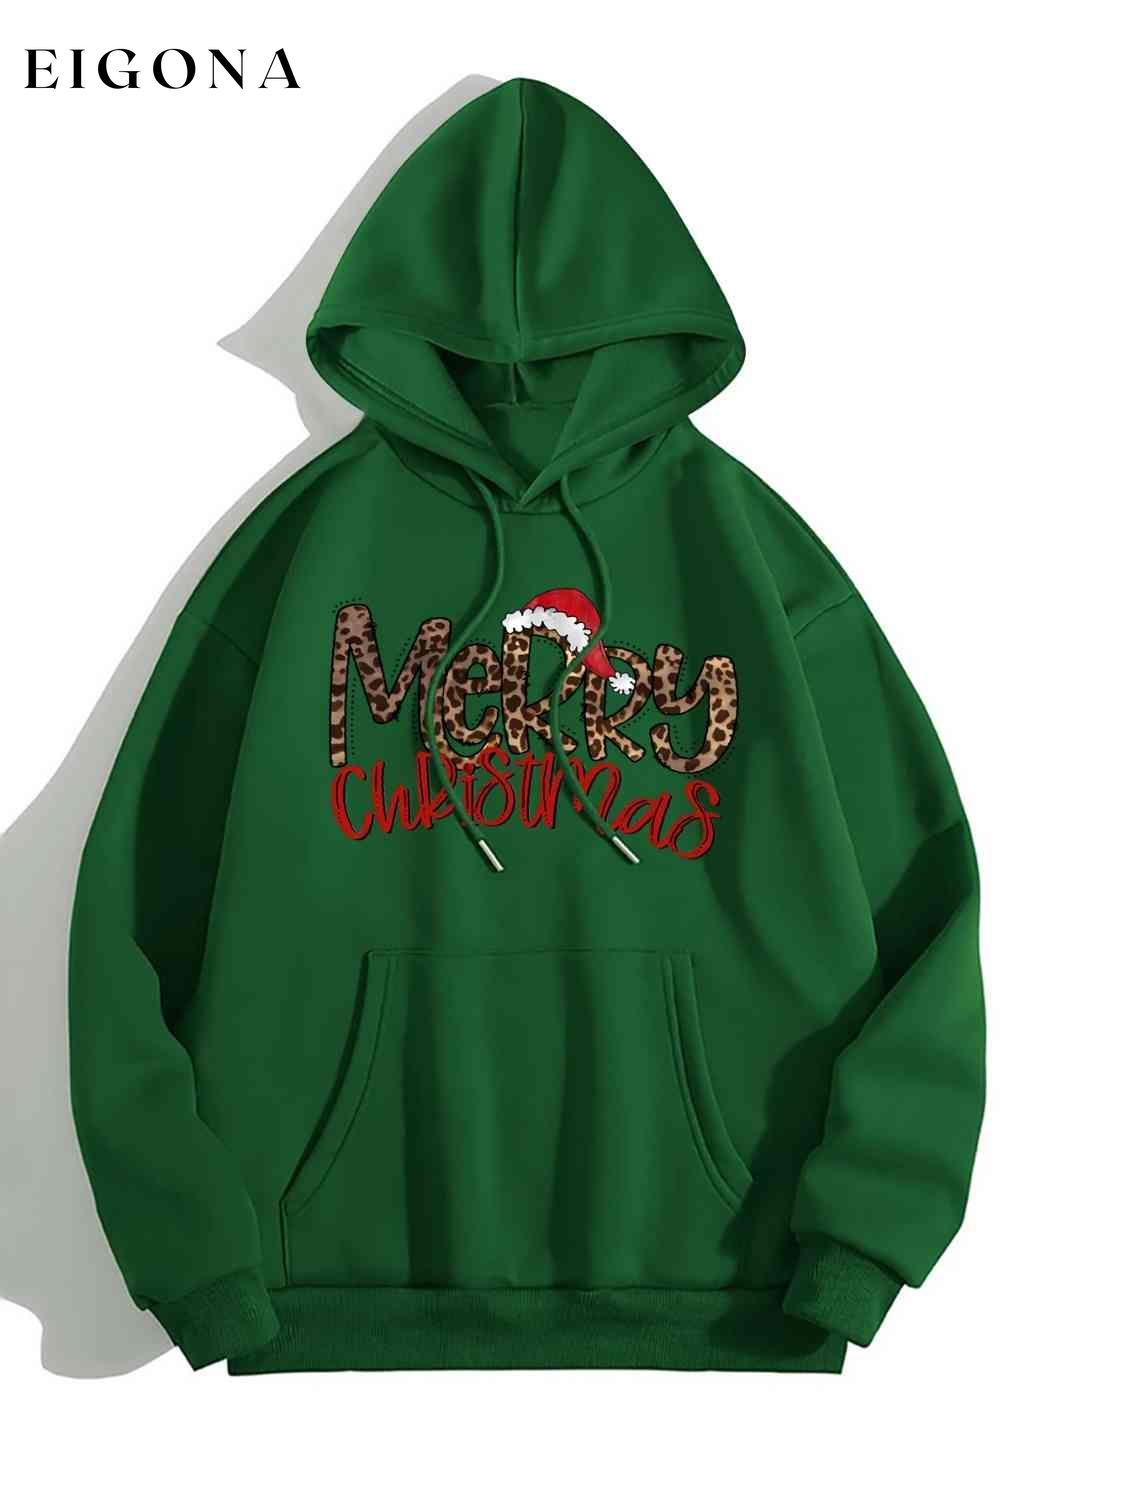 MERRY CHRISTMAS Graphic Drawstring Hoodie Green Christmas christmas sweater clothes E@M@E Ship From Overseas